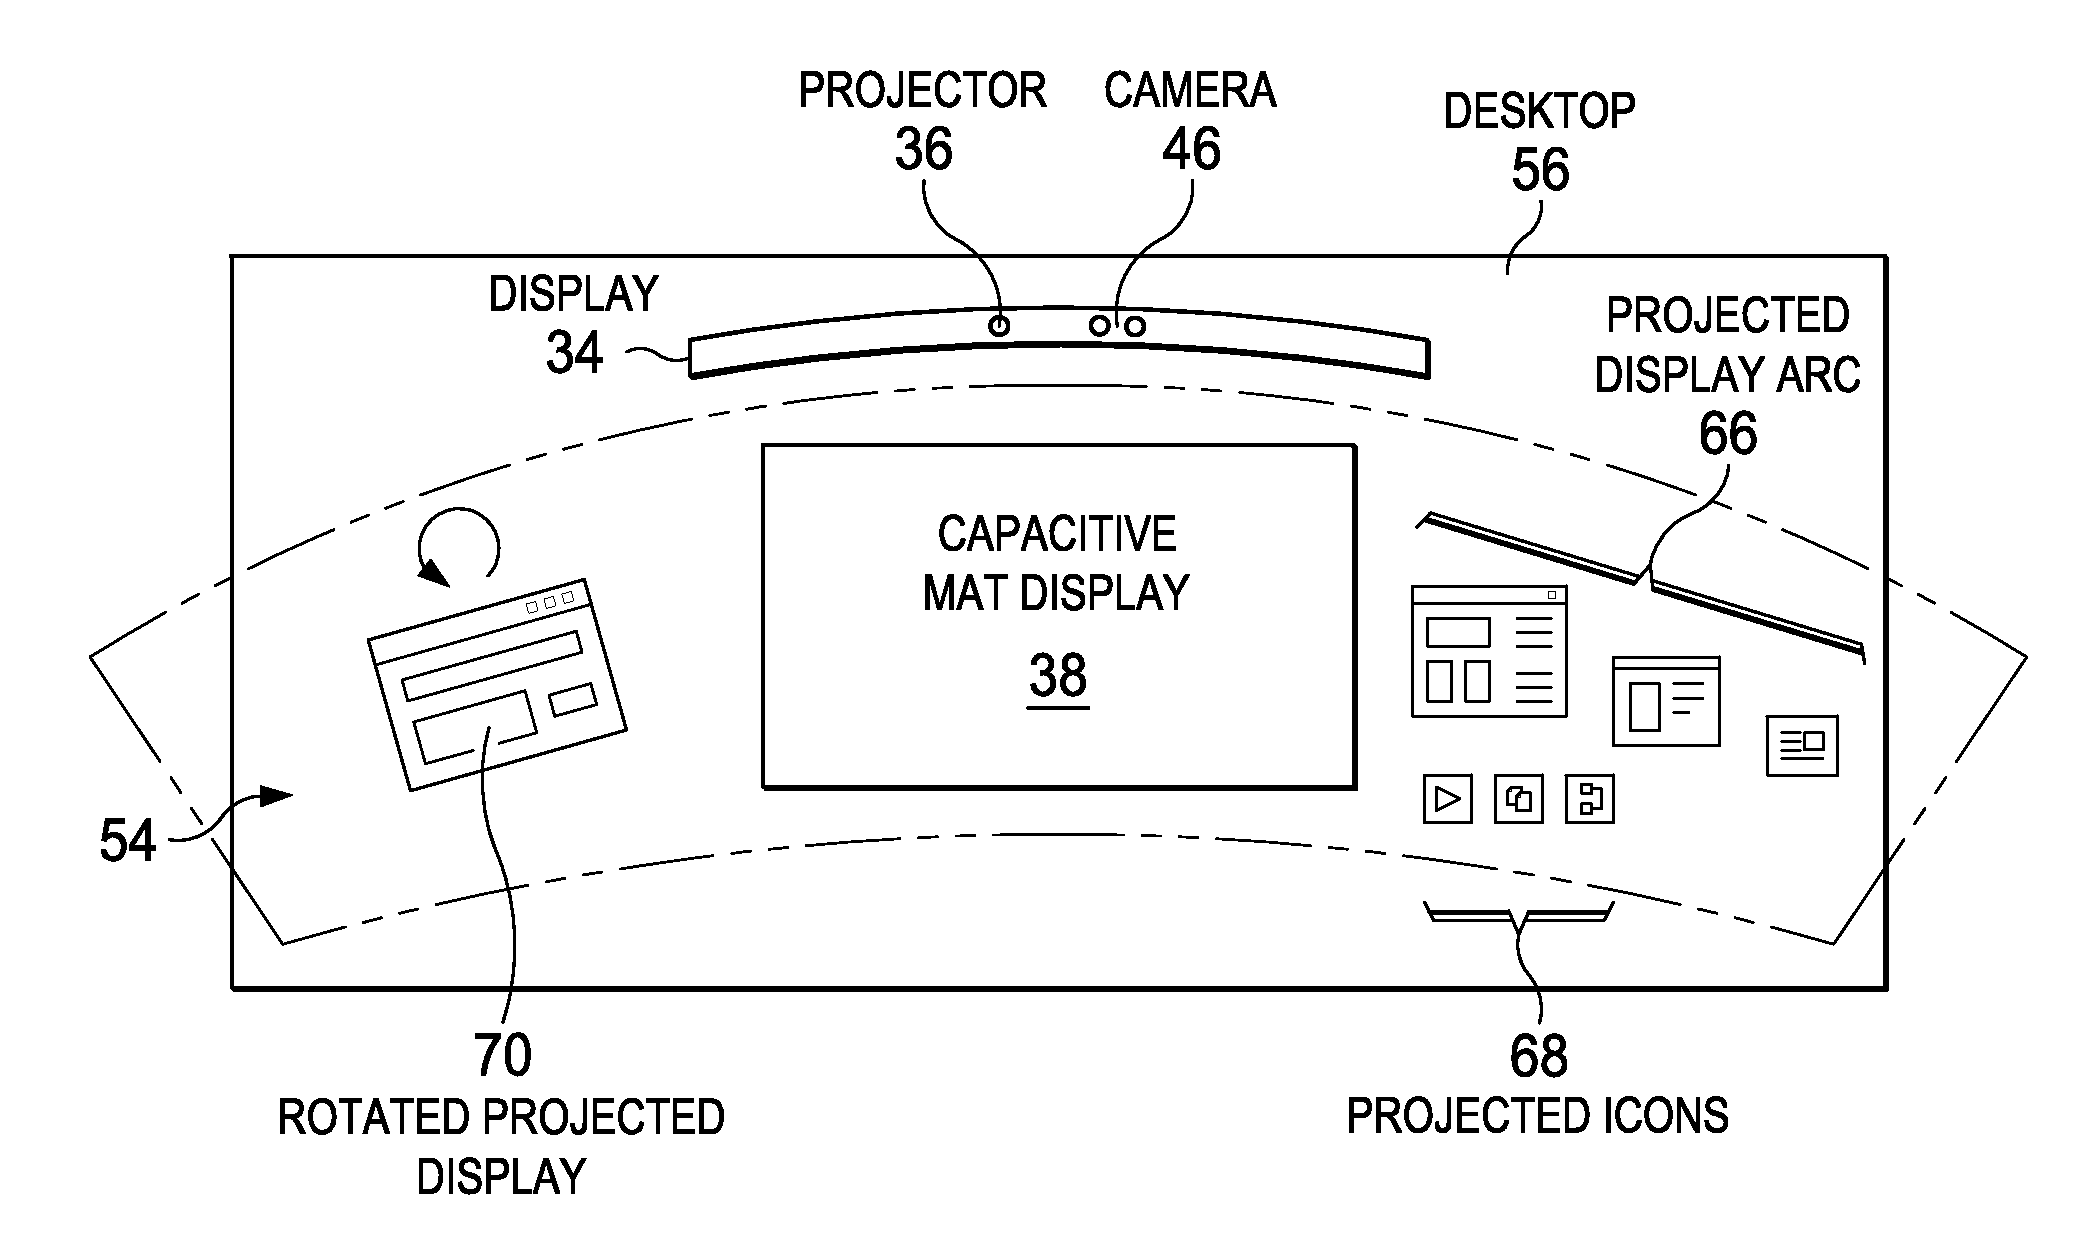 Disambiguation of False Touch Inputs at an Information Handling System Projected User Interface